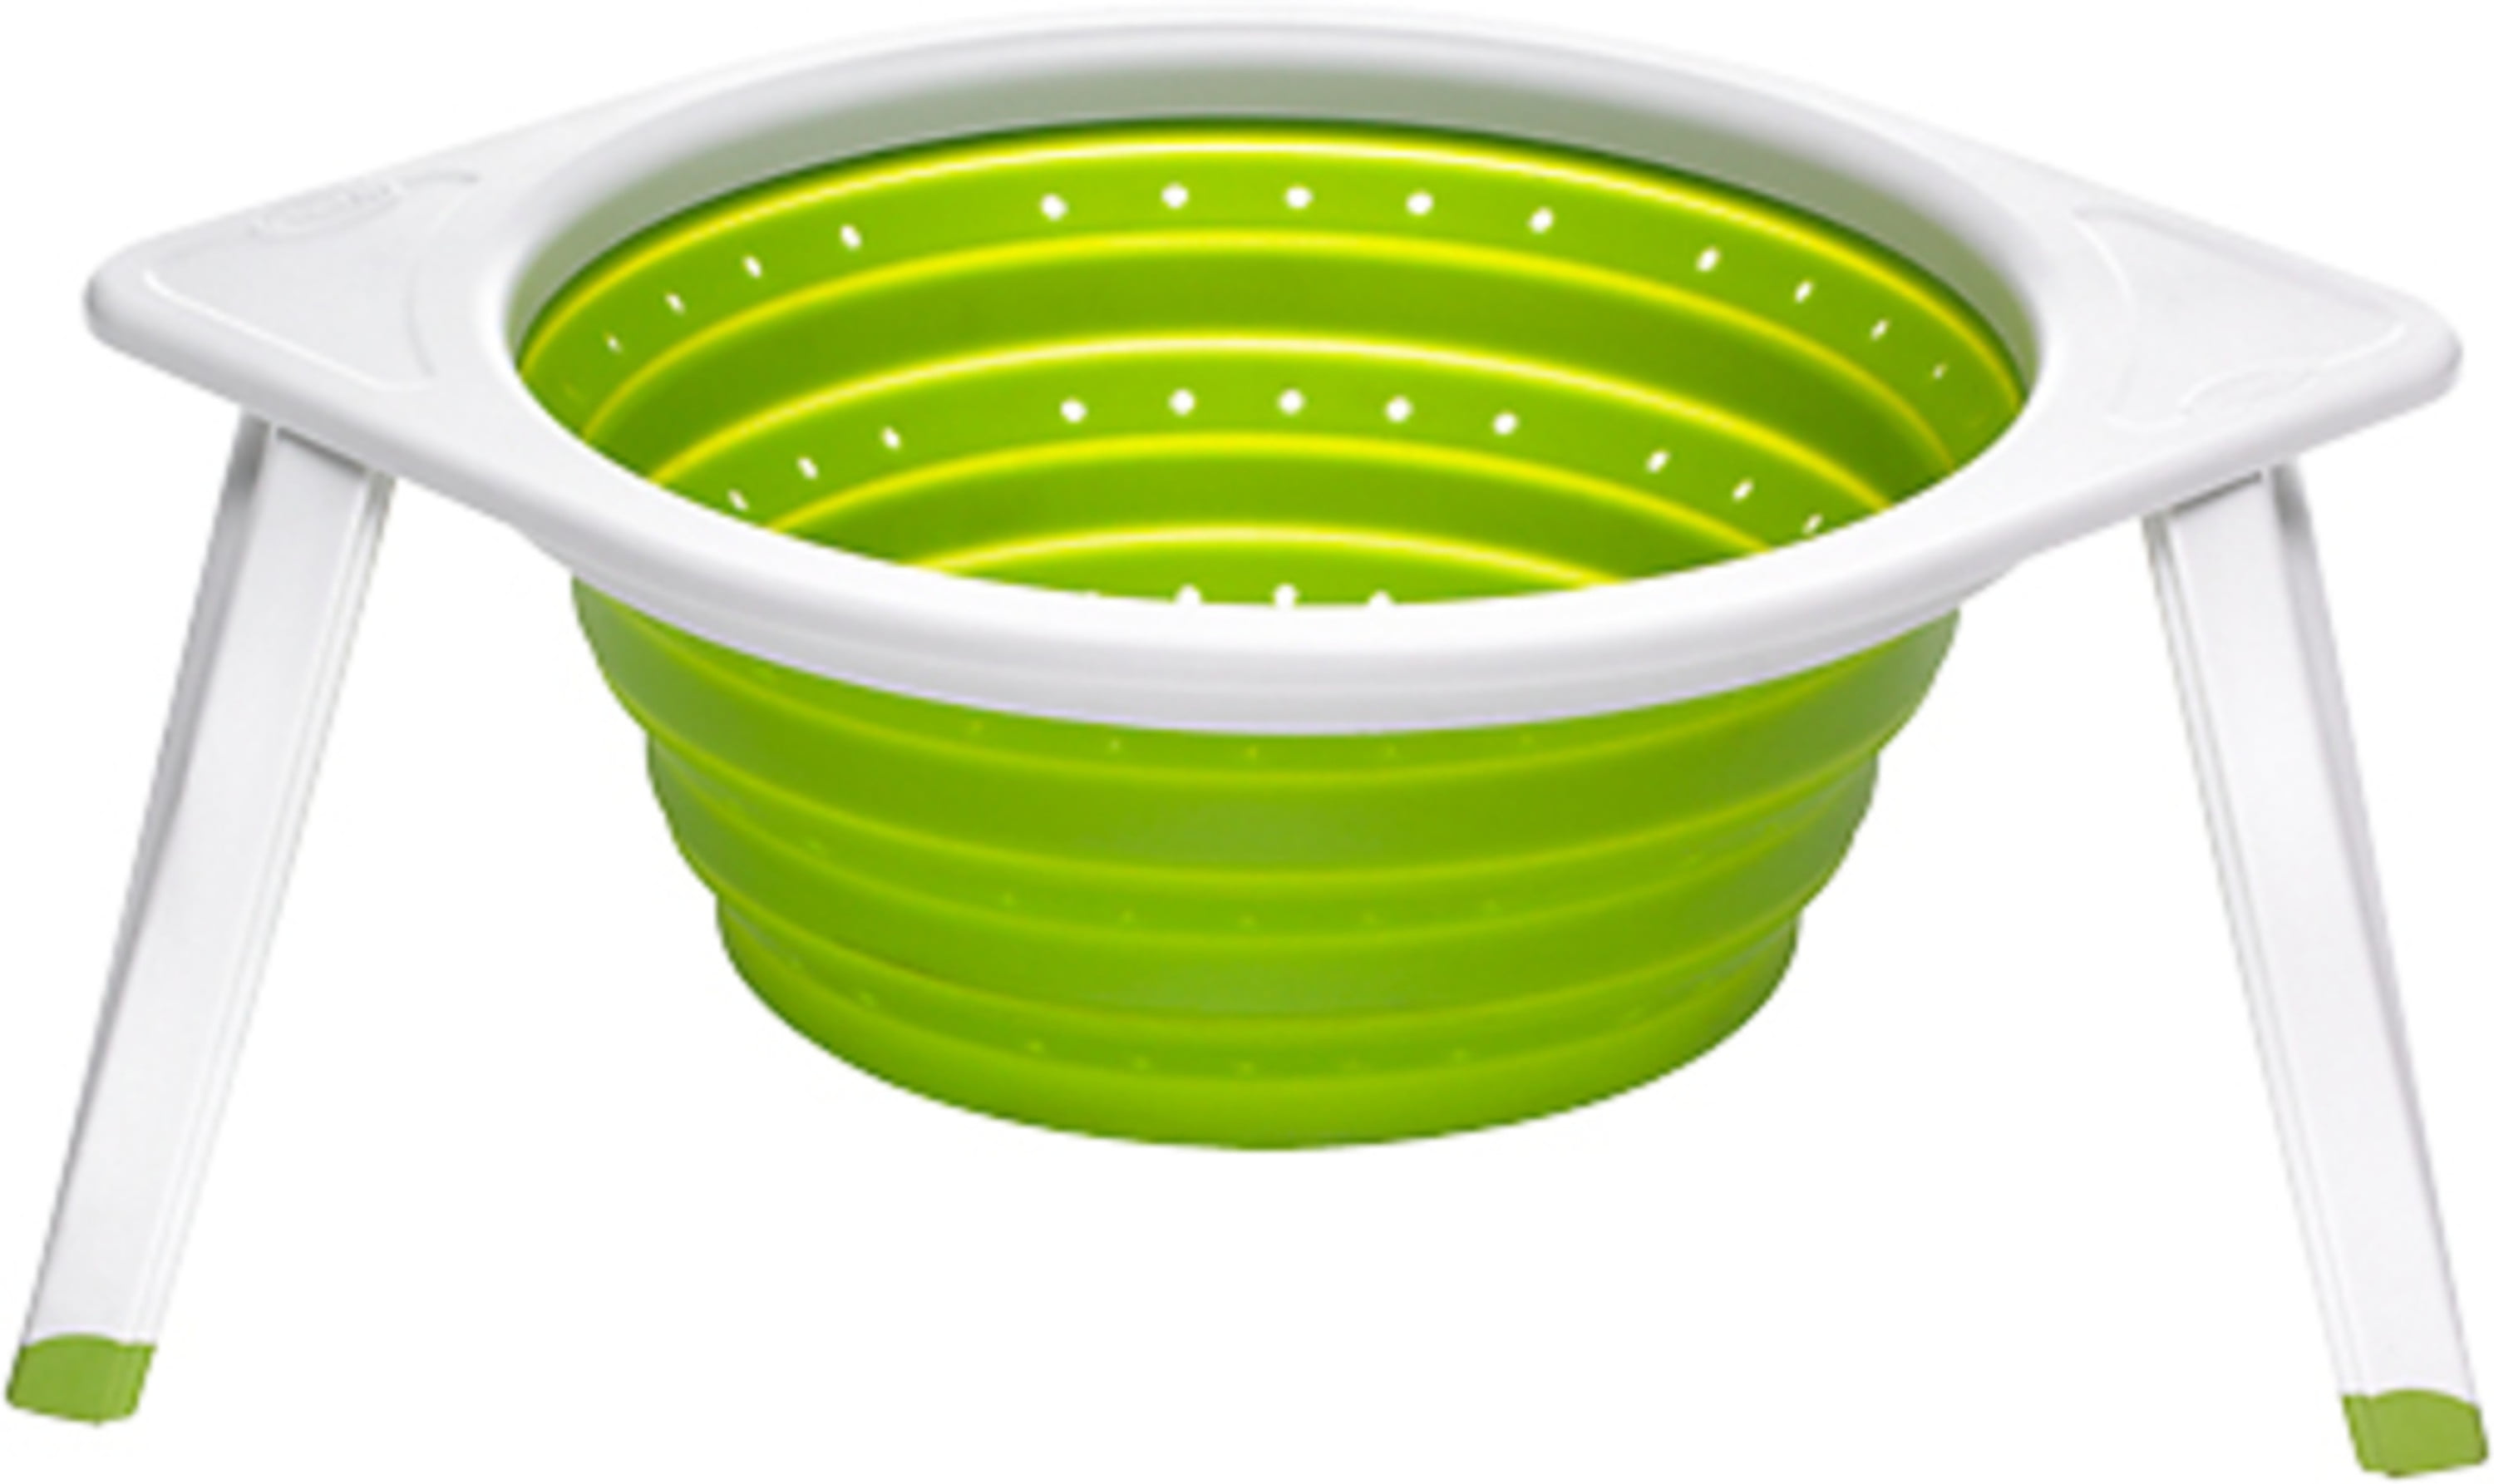 Dexas Collapsible POP Silicone Colander 8-Inch Green 